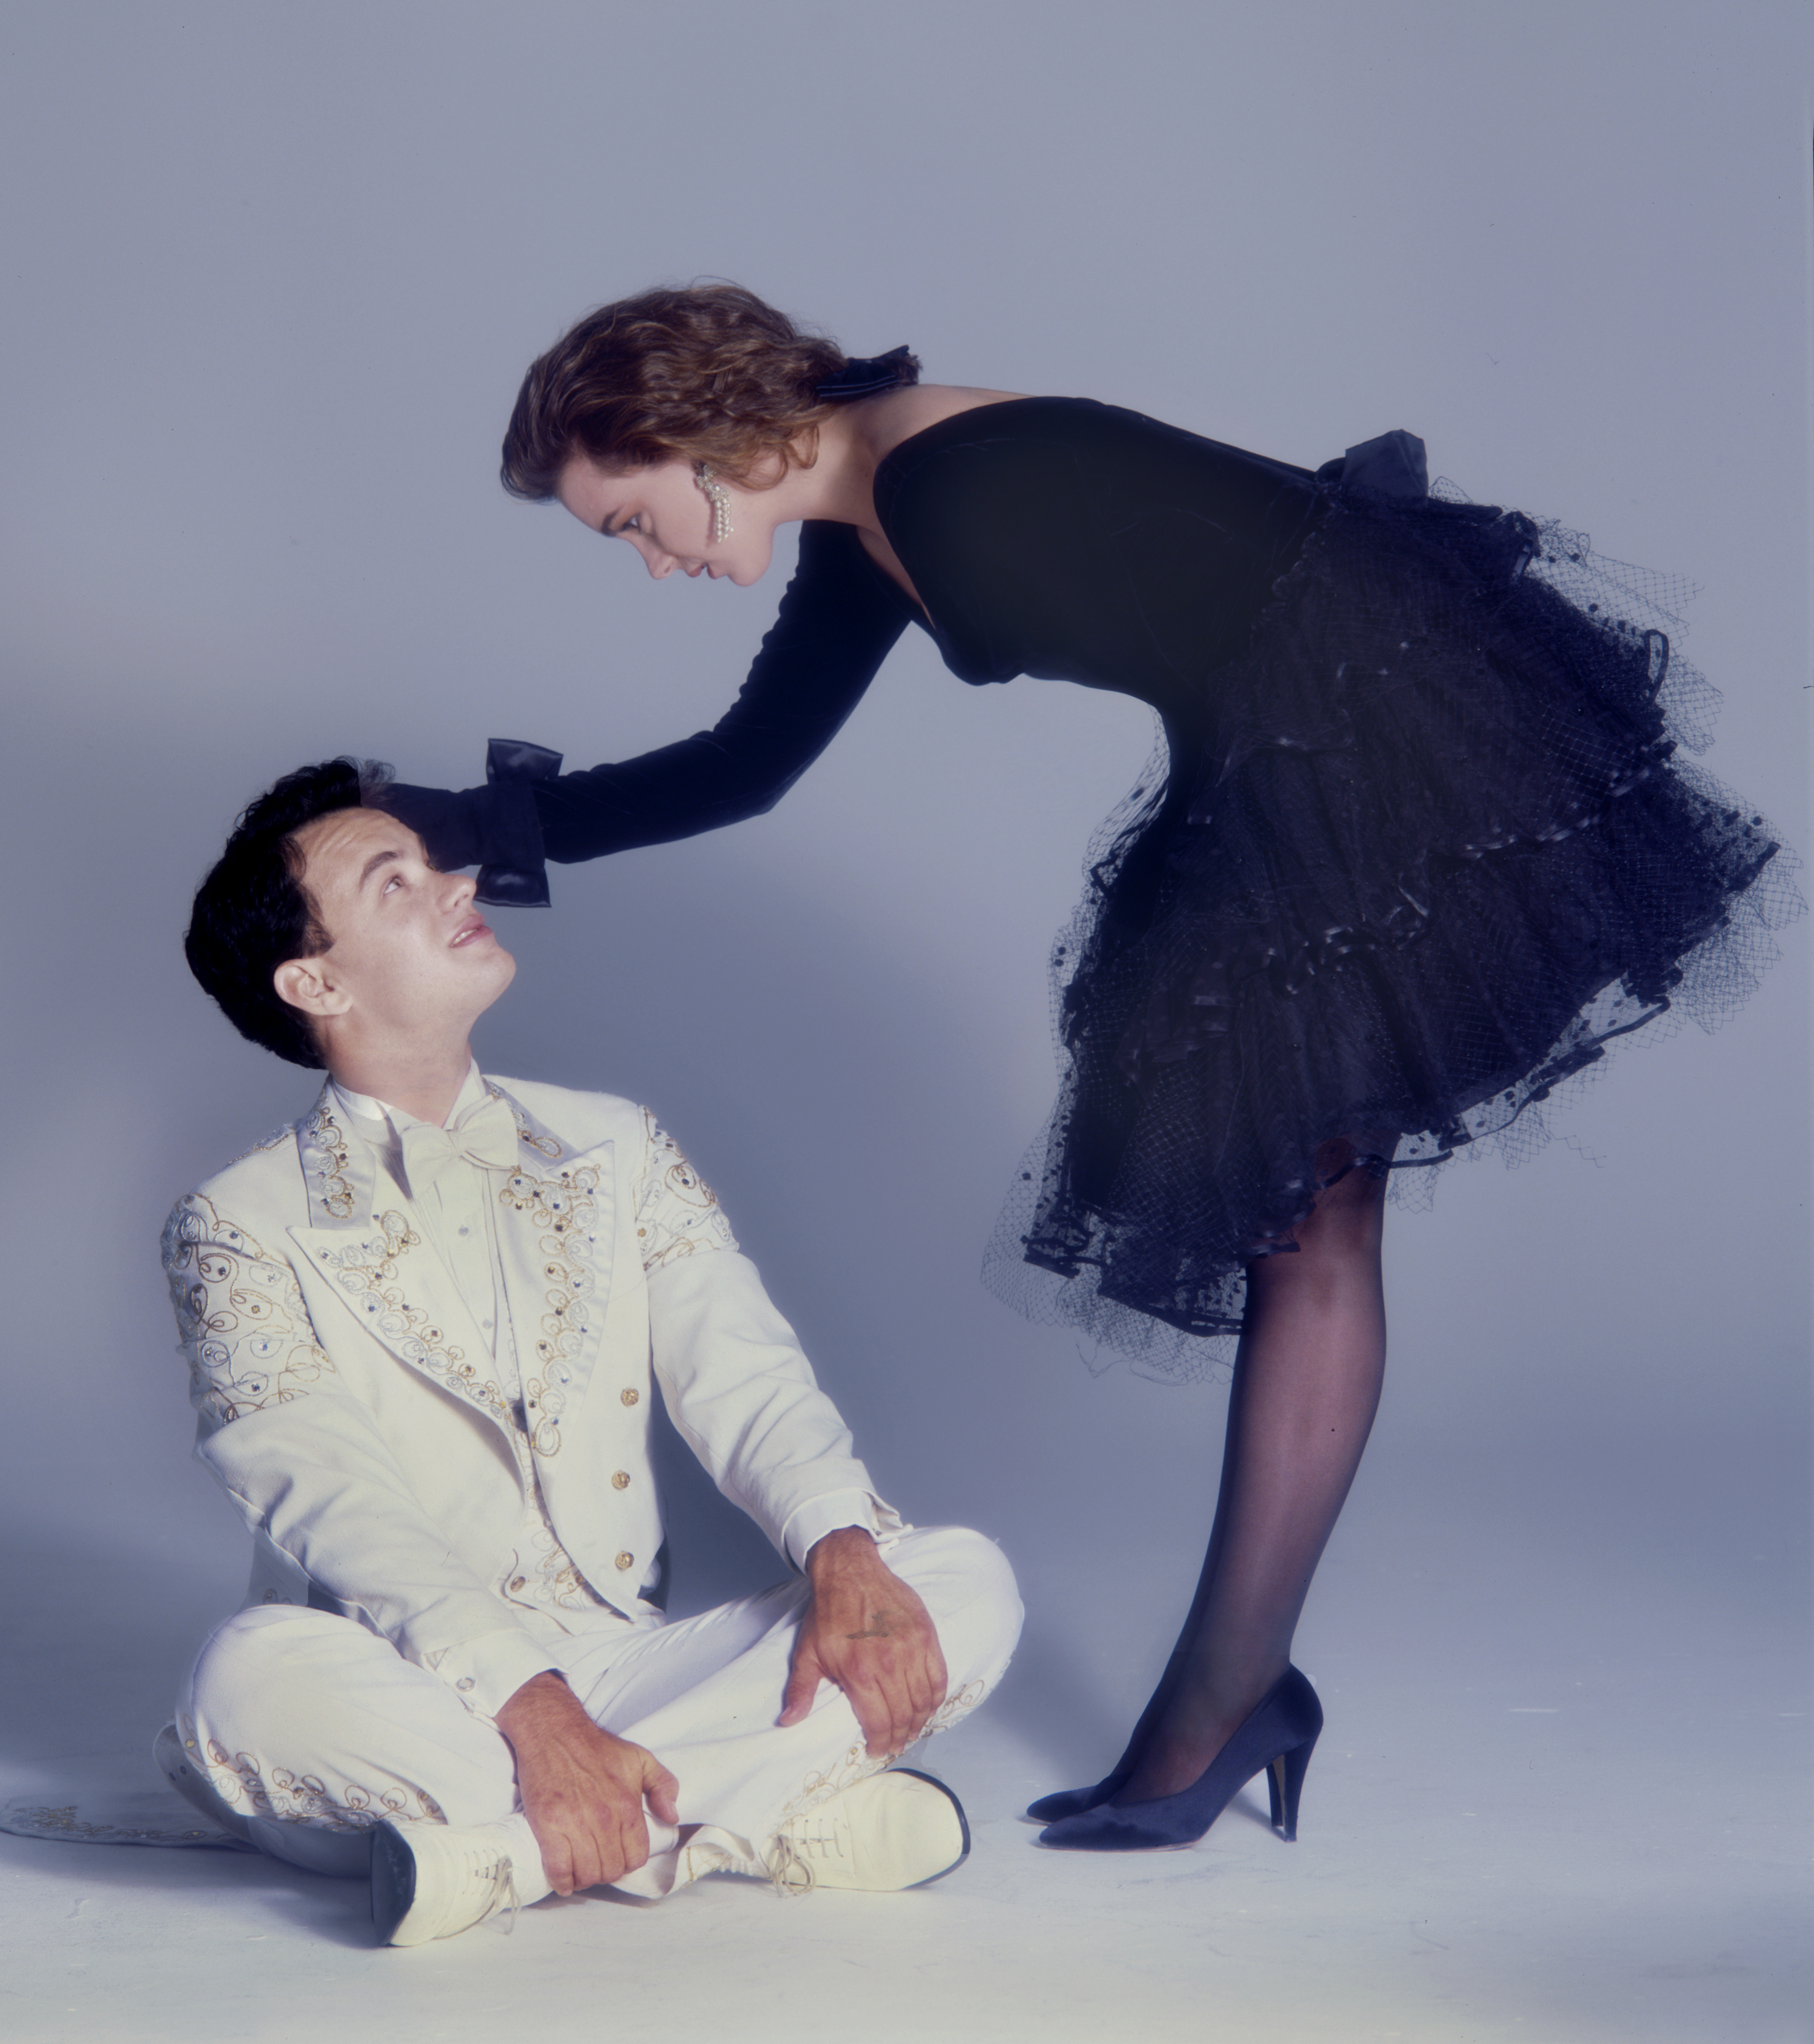 Tom Hanks and Elizabeth Perkins at a promotional shoot for their film "Big" in 1988 | Source: Getty Images